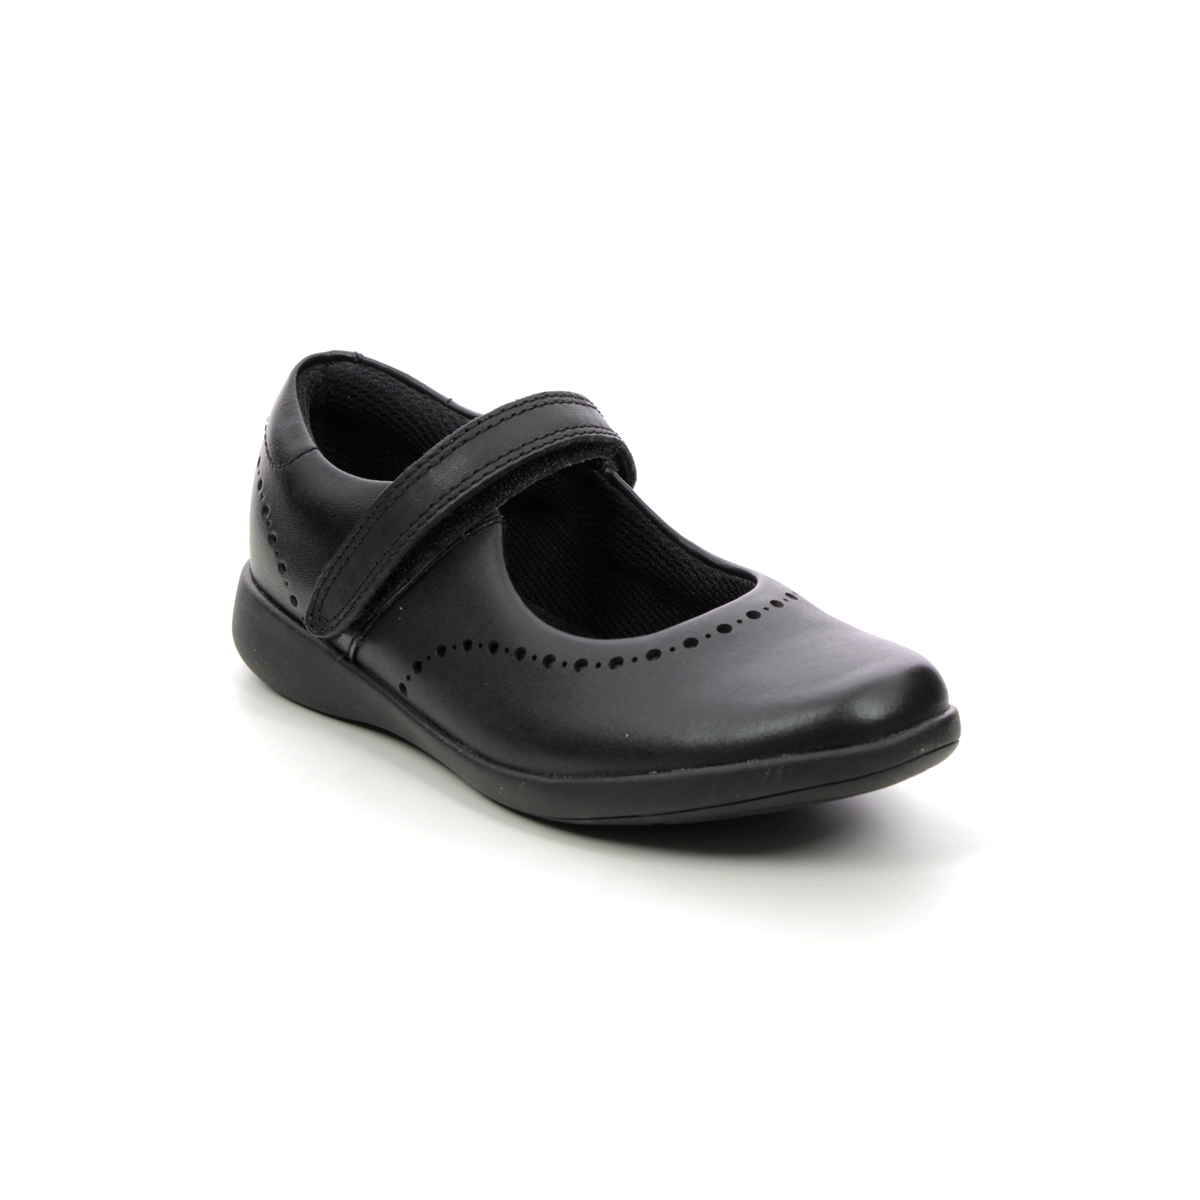 Clarks Etch Craft K Black leather Kids girls school shoes 4310-15E in a Plain Leather in Size 12.5